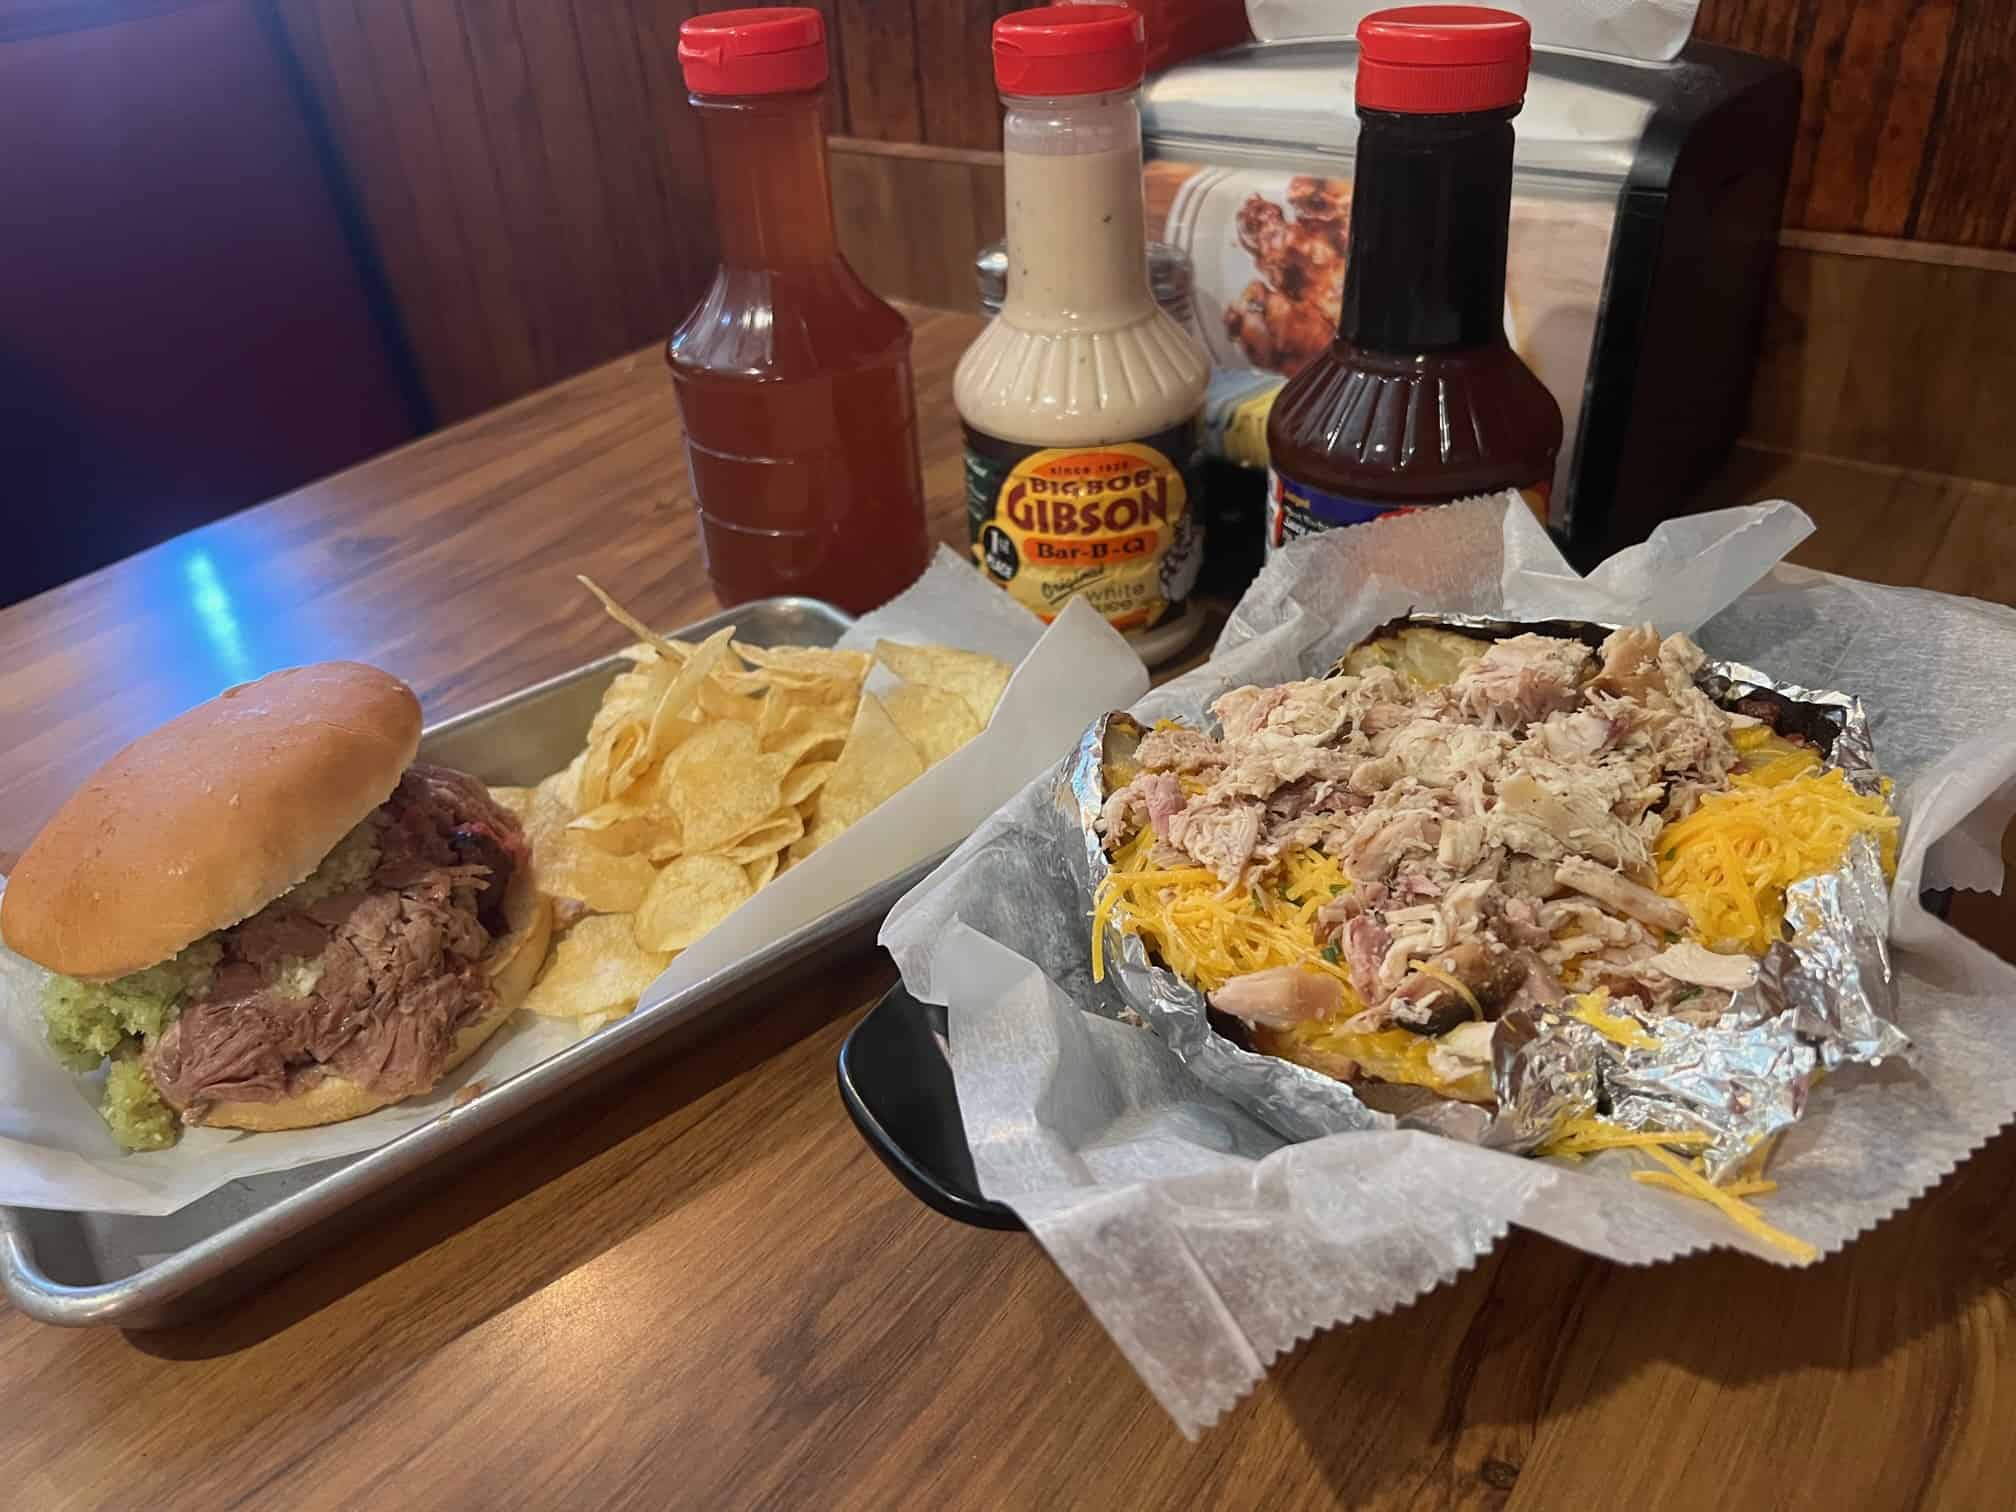 Best things to do in Hartselle Alabama - Connie Pearson - lunch at Big Bob Gibson's Bar-B-Q